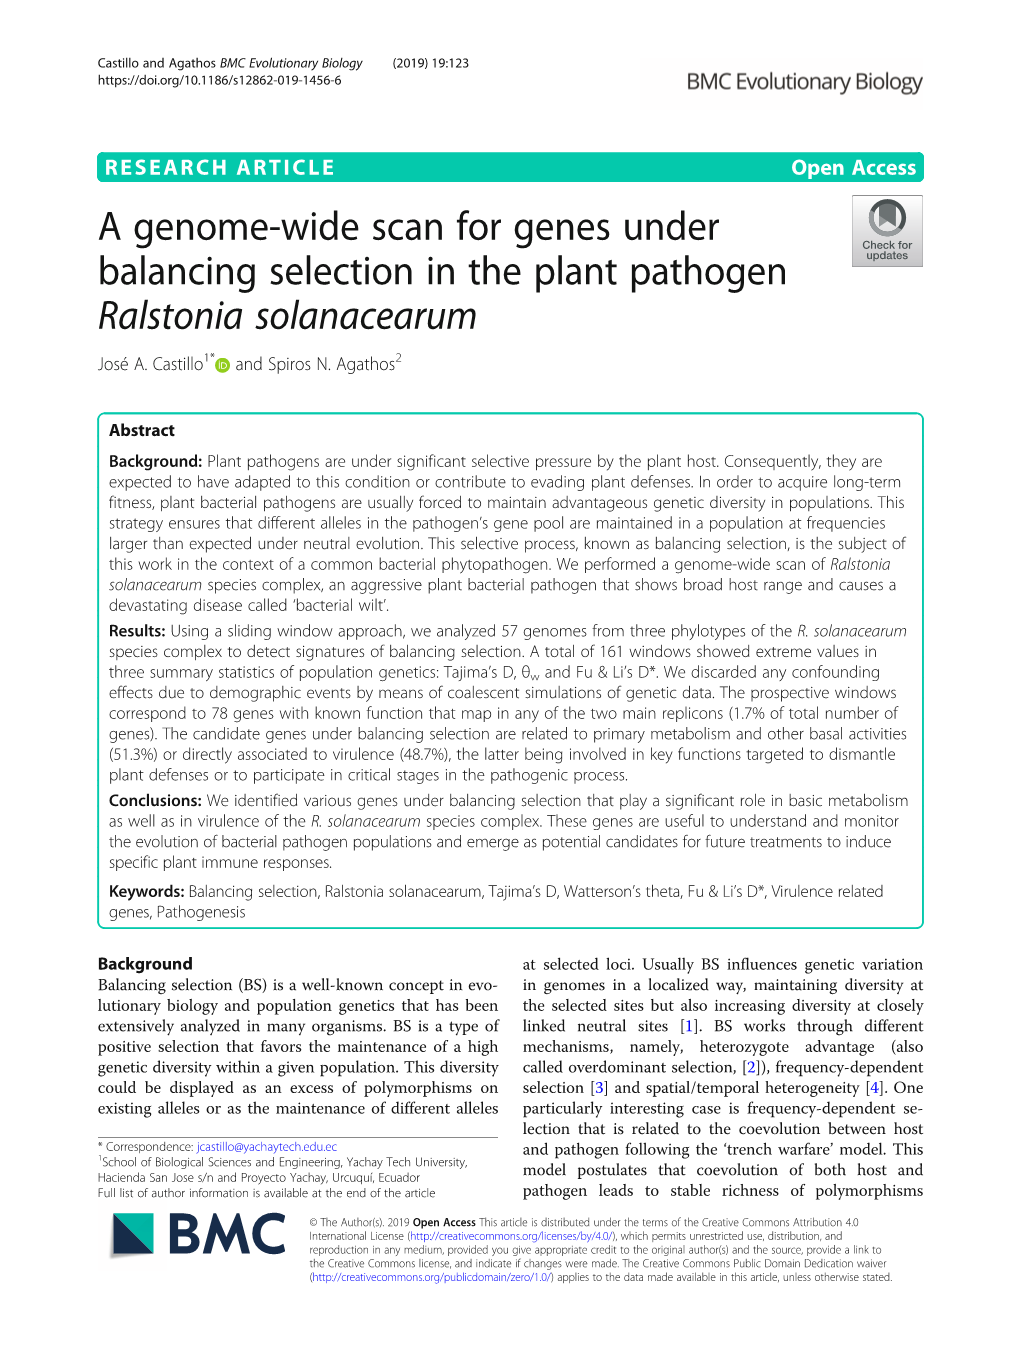 A Genome-Wide Scan for Genes Under Balancing Selection in the Plant Pathogen Ralstonia Solanacearum José A